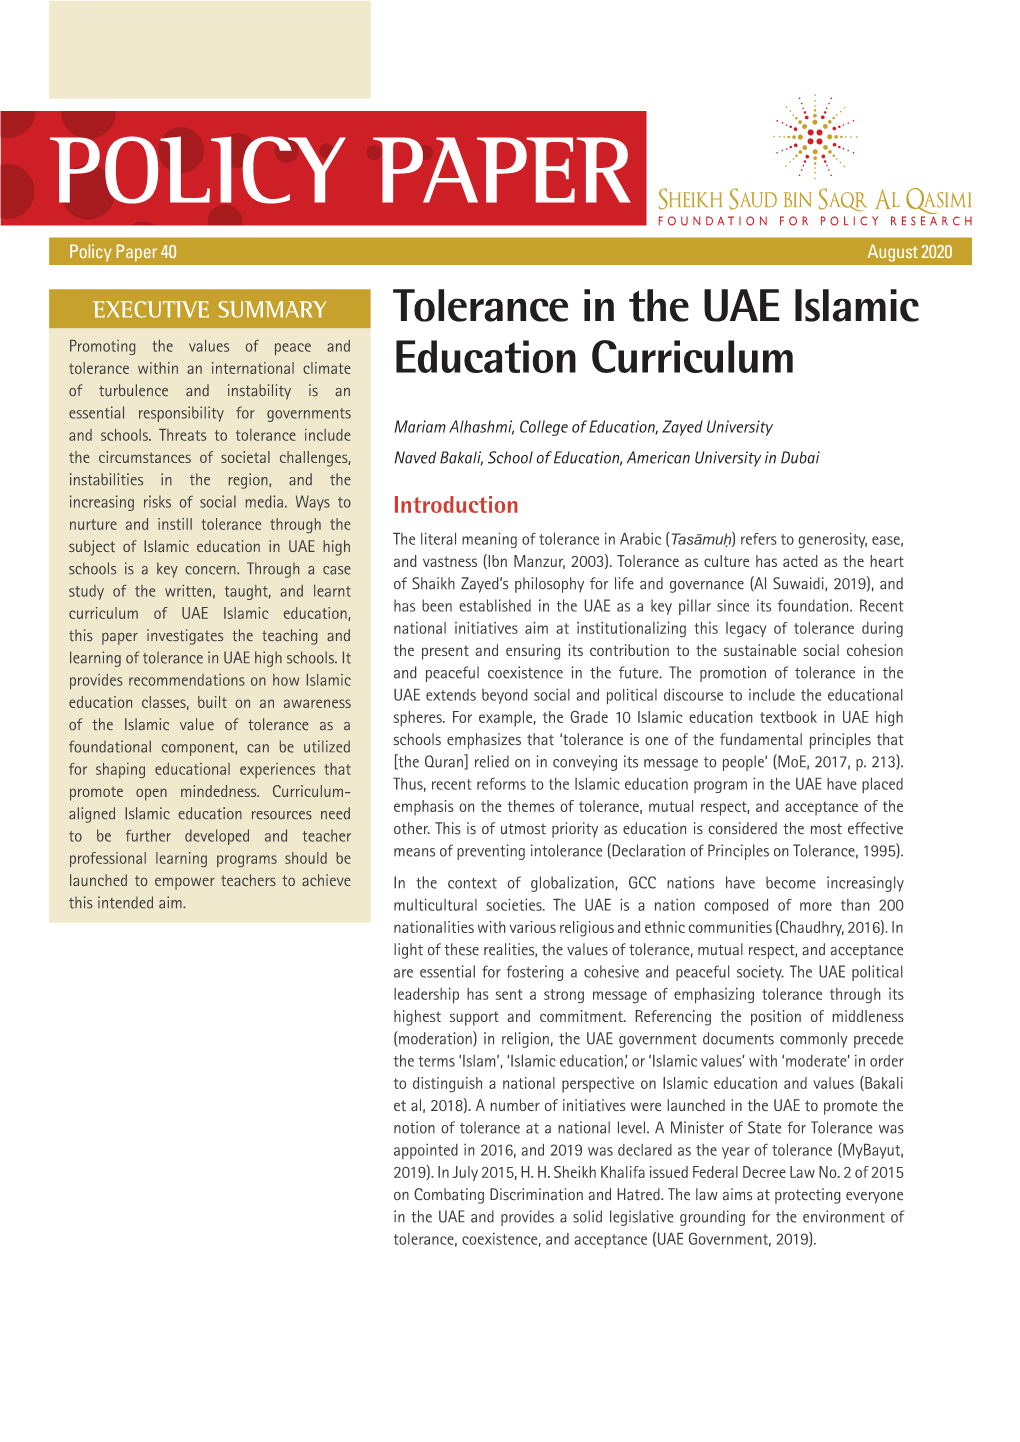 POLICY PAPER Tolerance in the UAE Islamic Education Curriculum